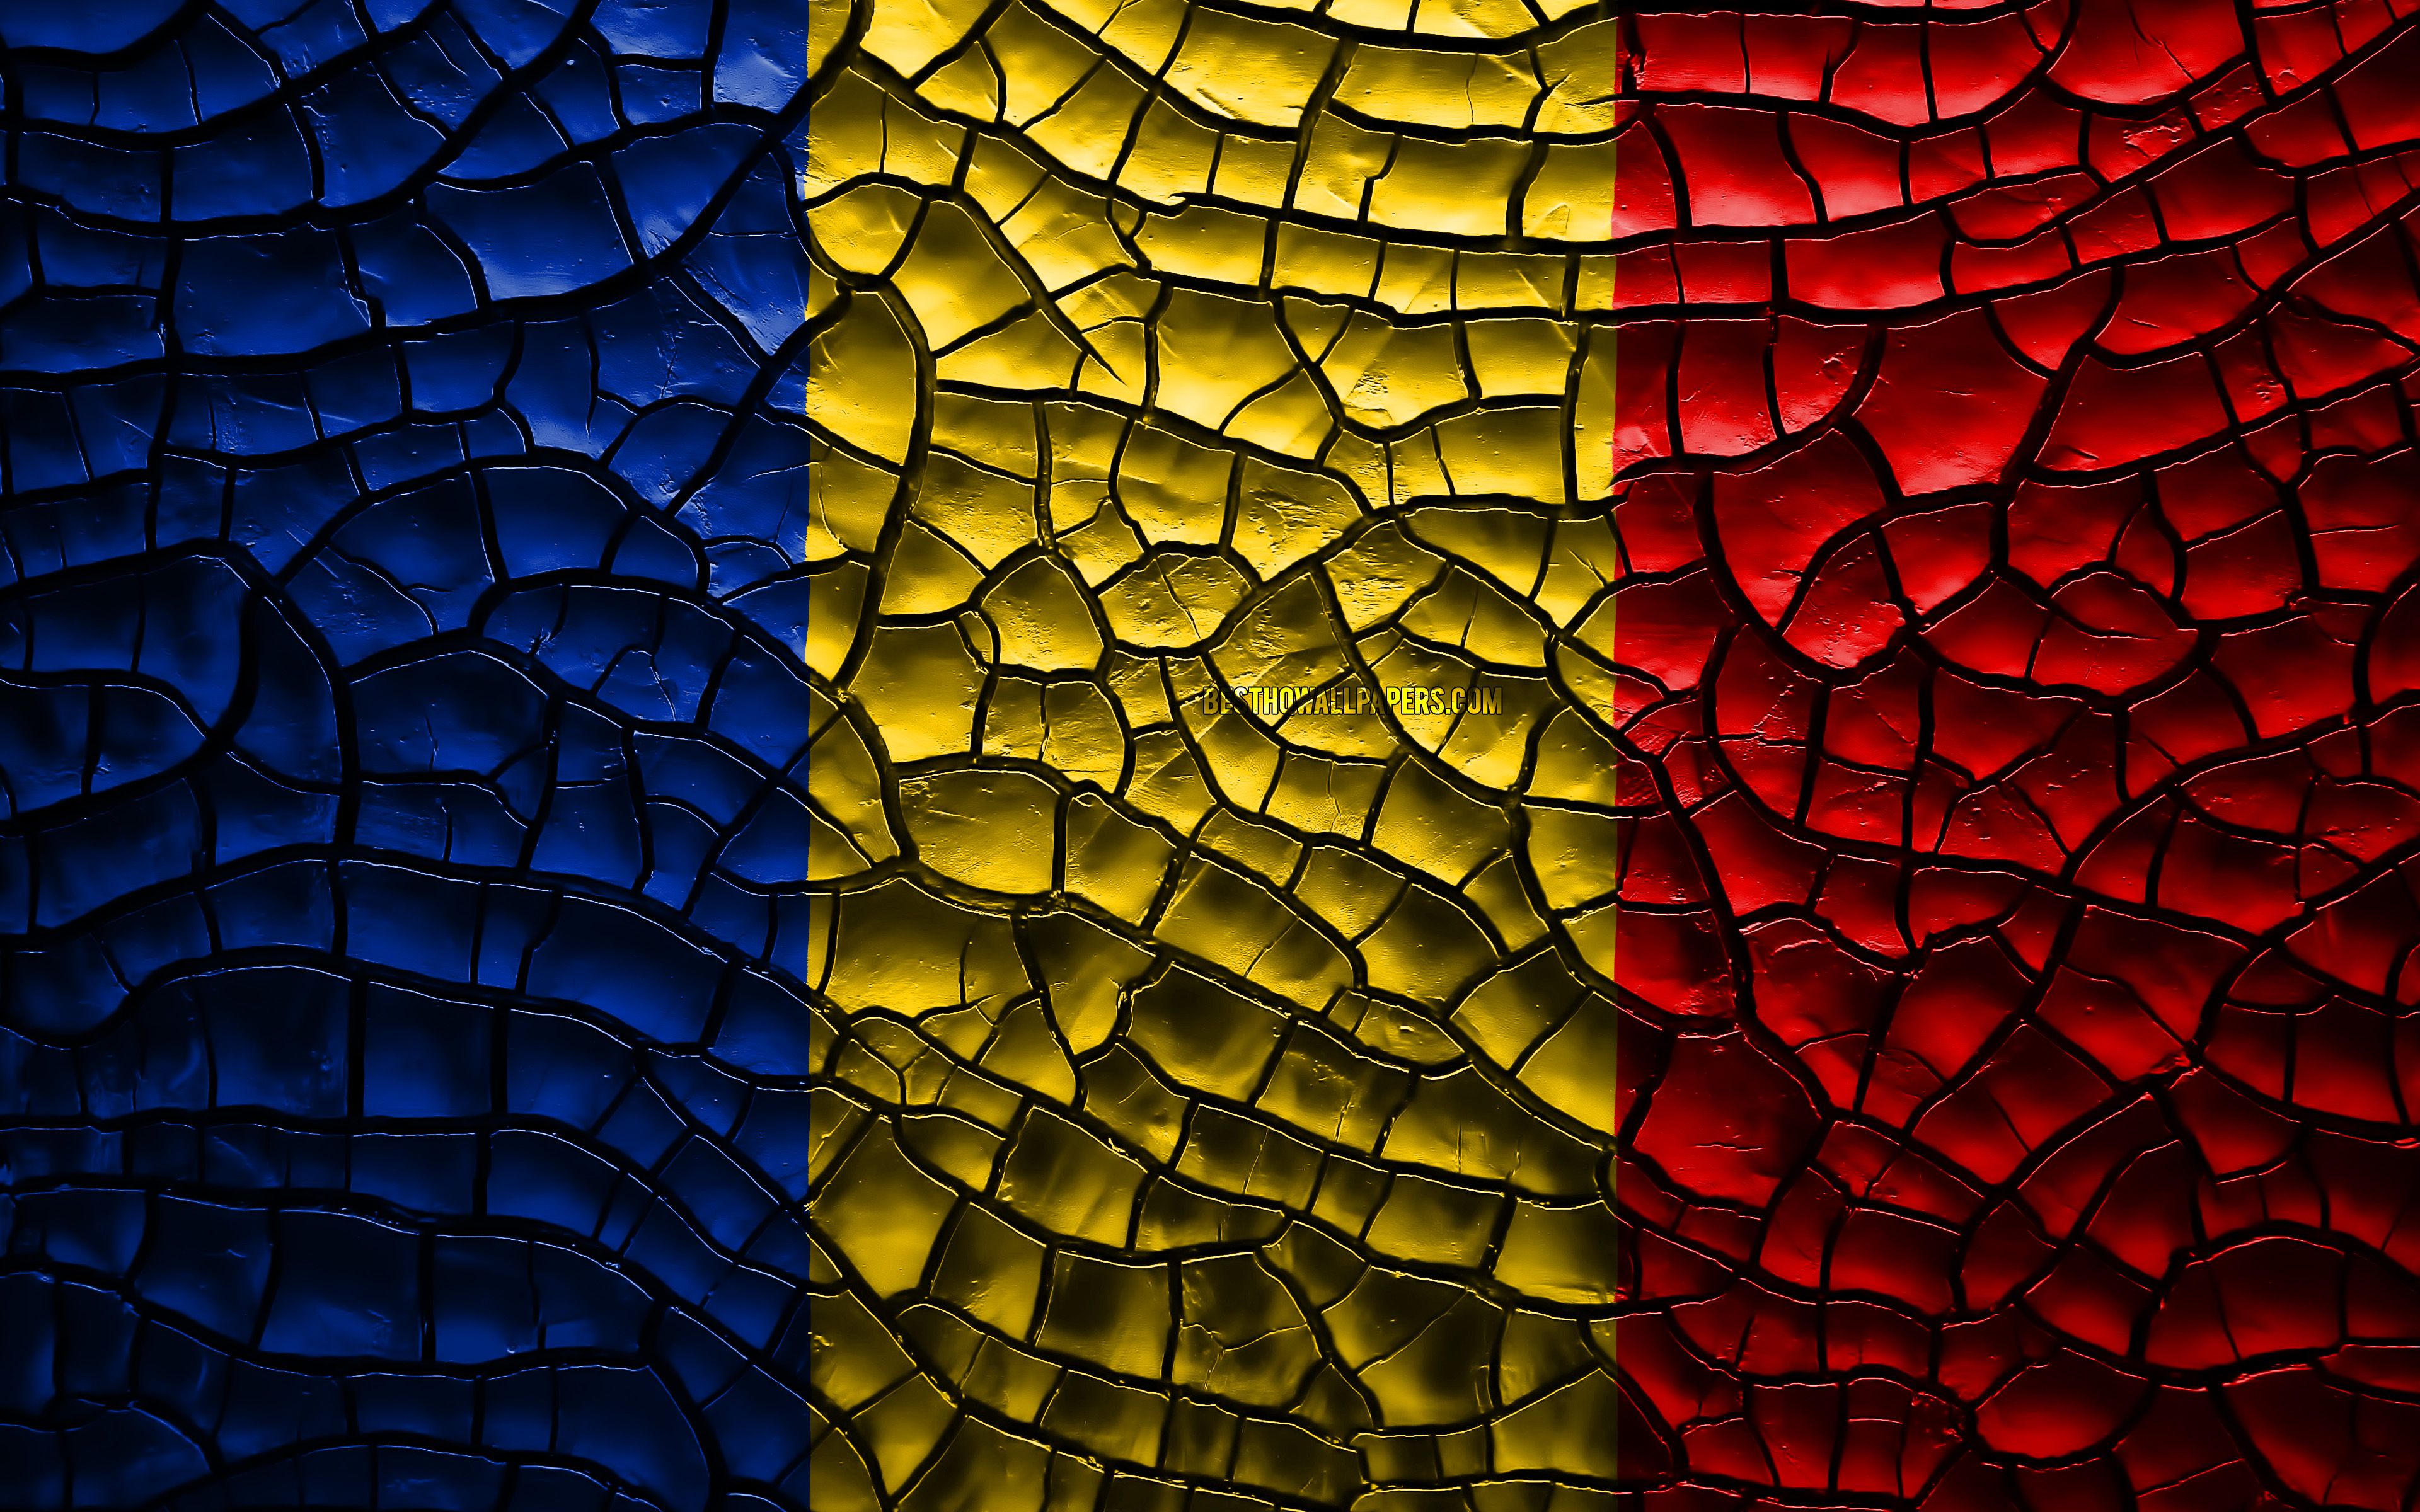 Download wallpaper Flag of Romania, 4k, cracked soil, Europe, Romanian flag, 3D art, Romania, European countries, national symbols, Romania 3D flag for desktop with resolution 3840x2400. High Quality HD picture wallpaper